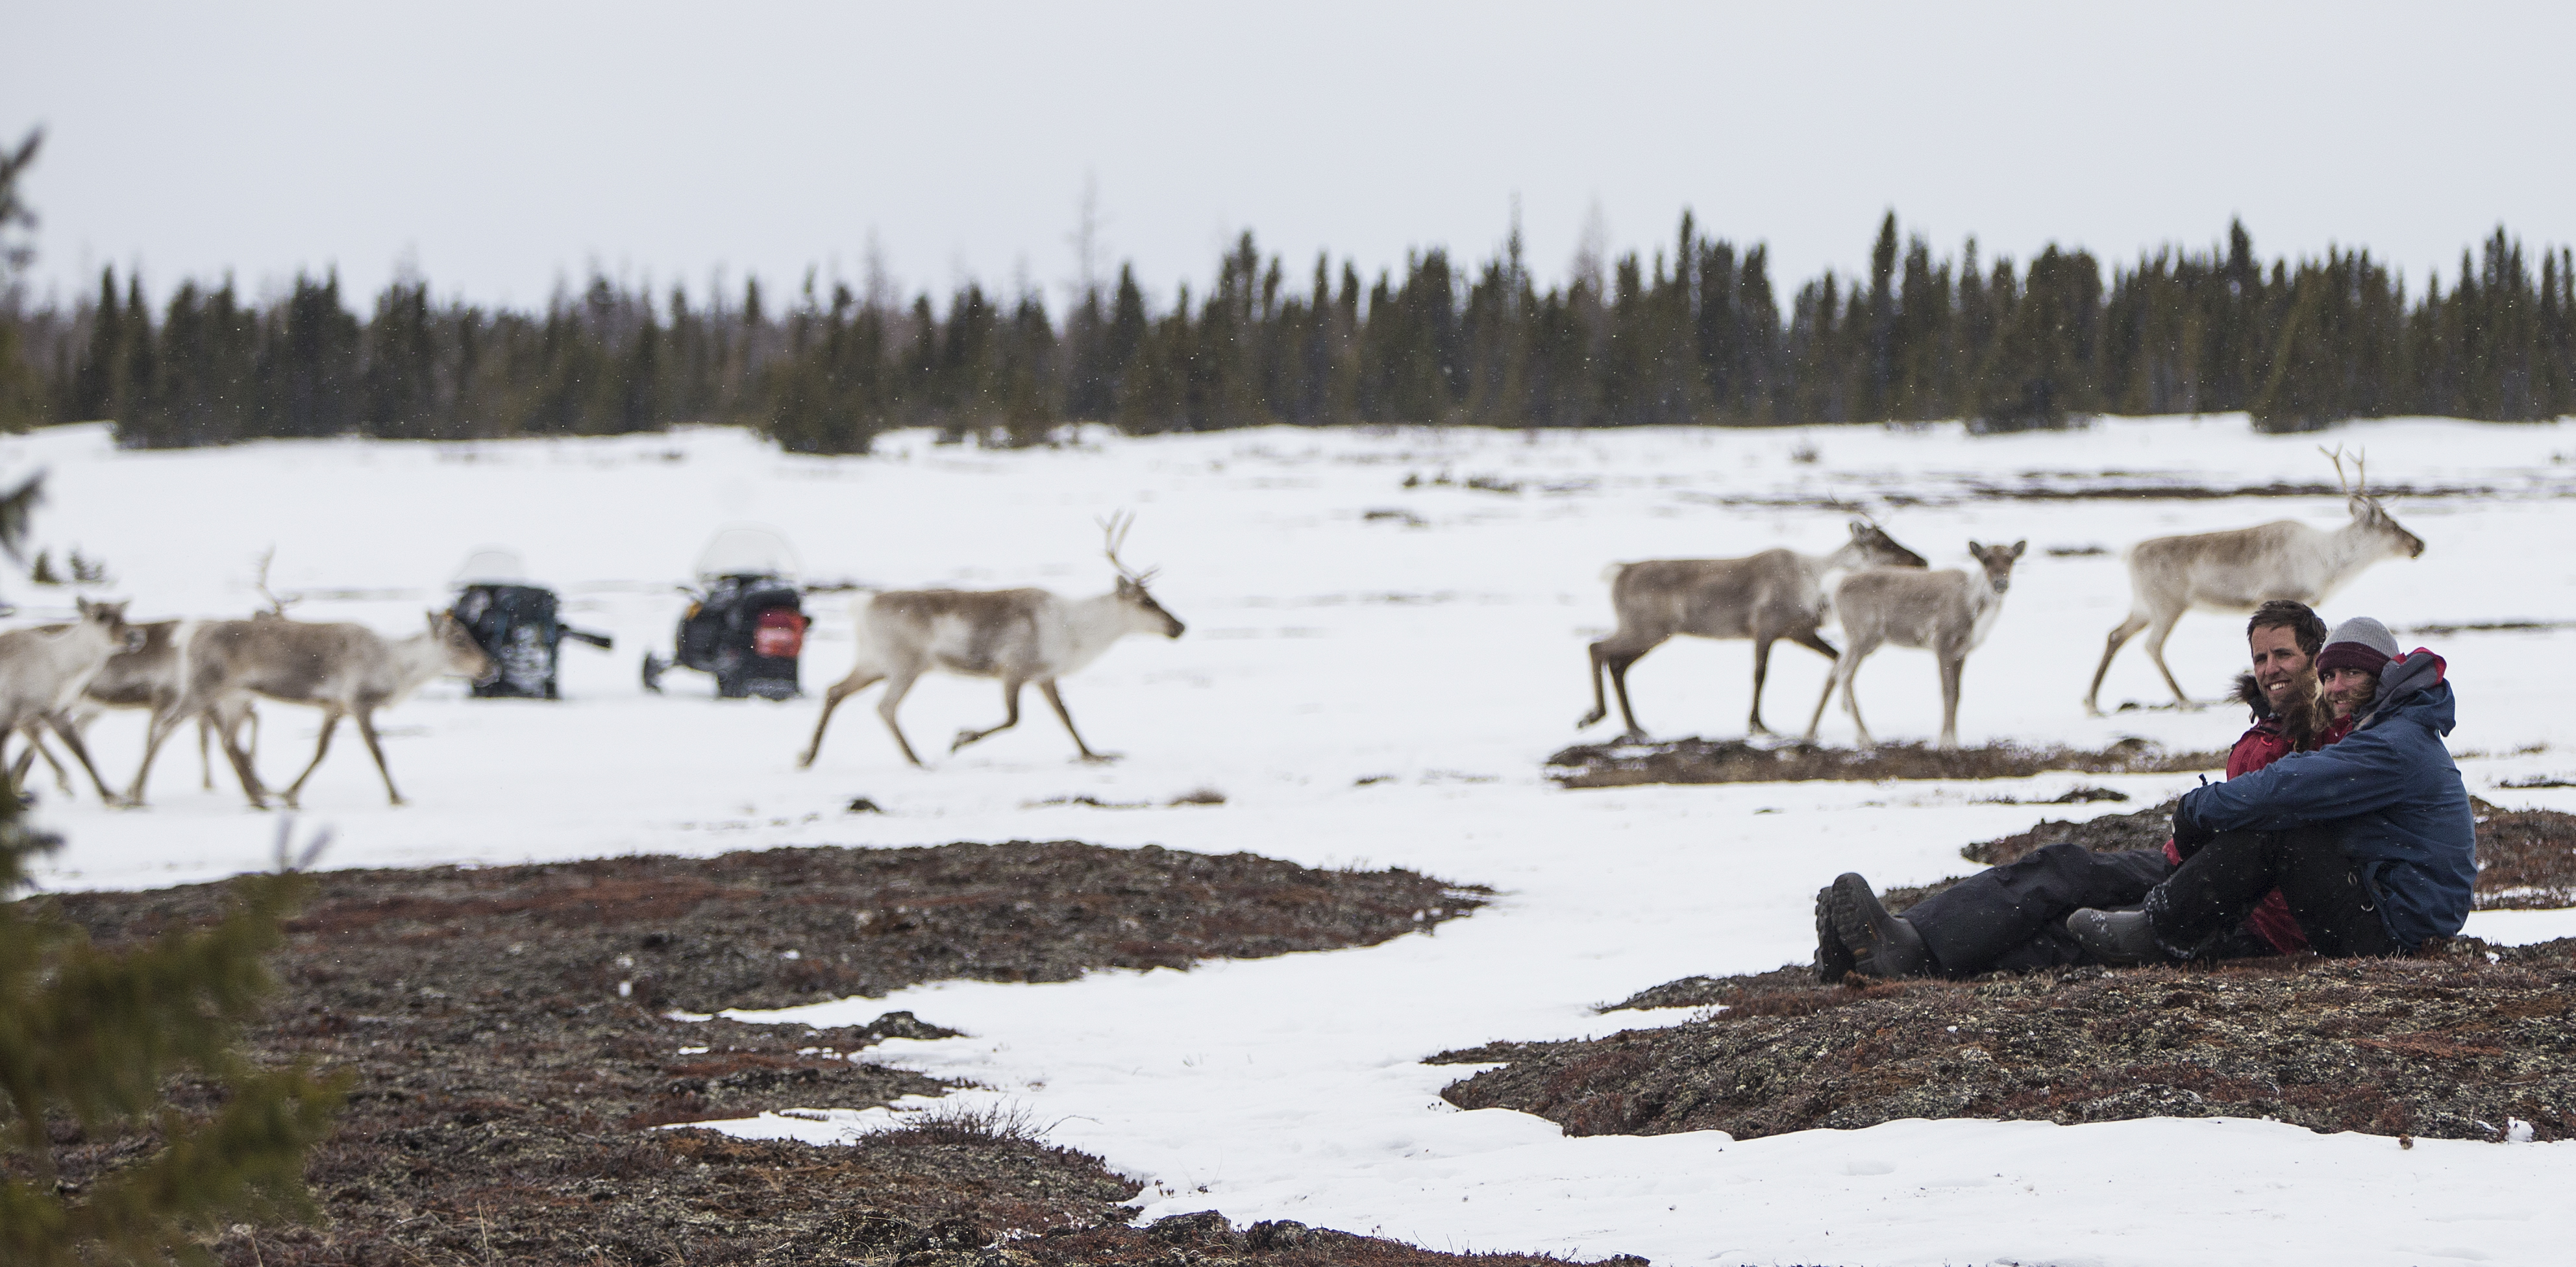 Watching the Spring Caribou Migration